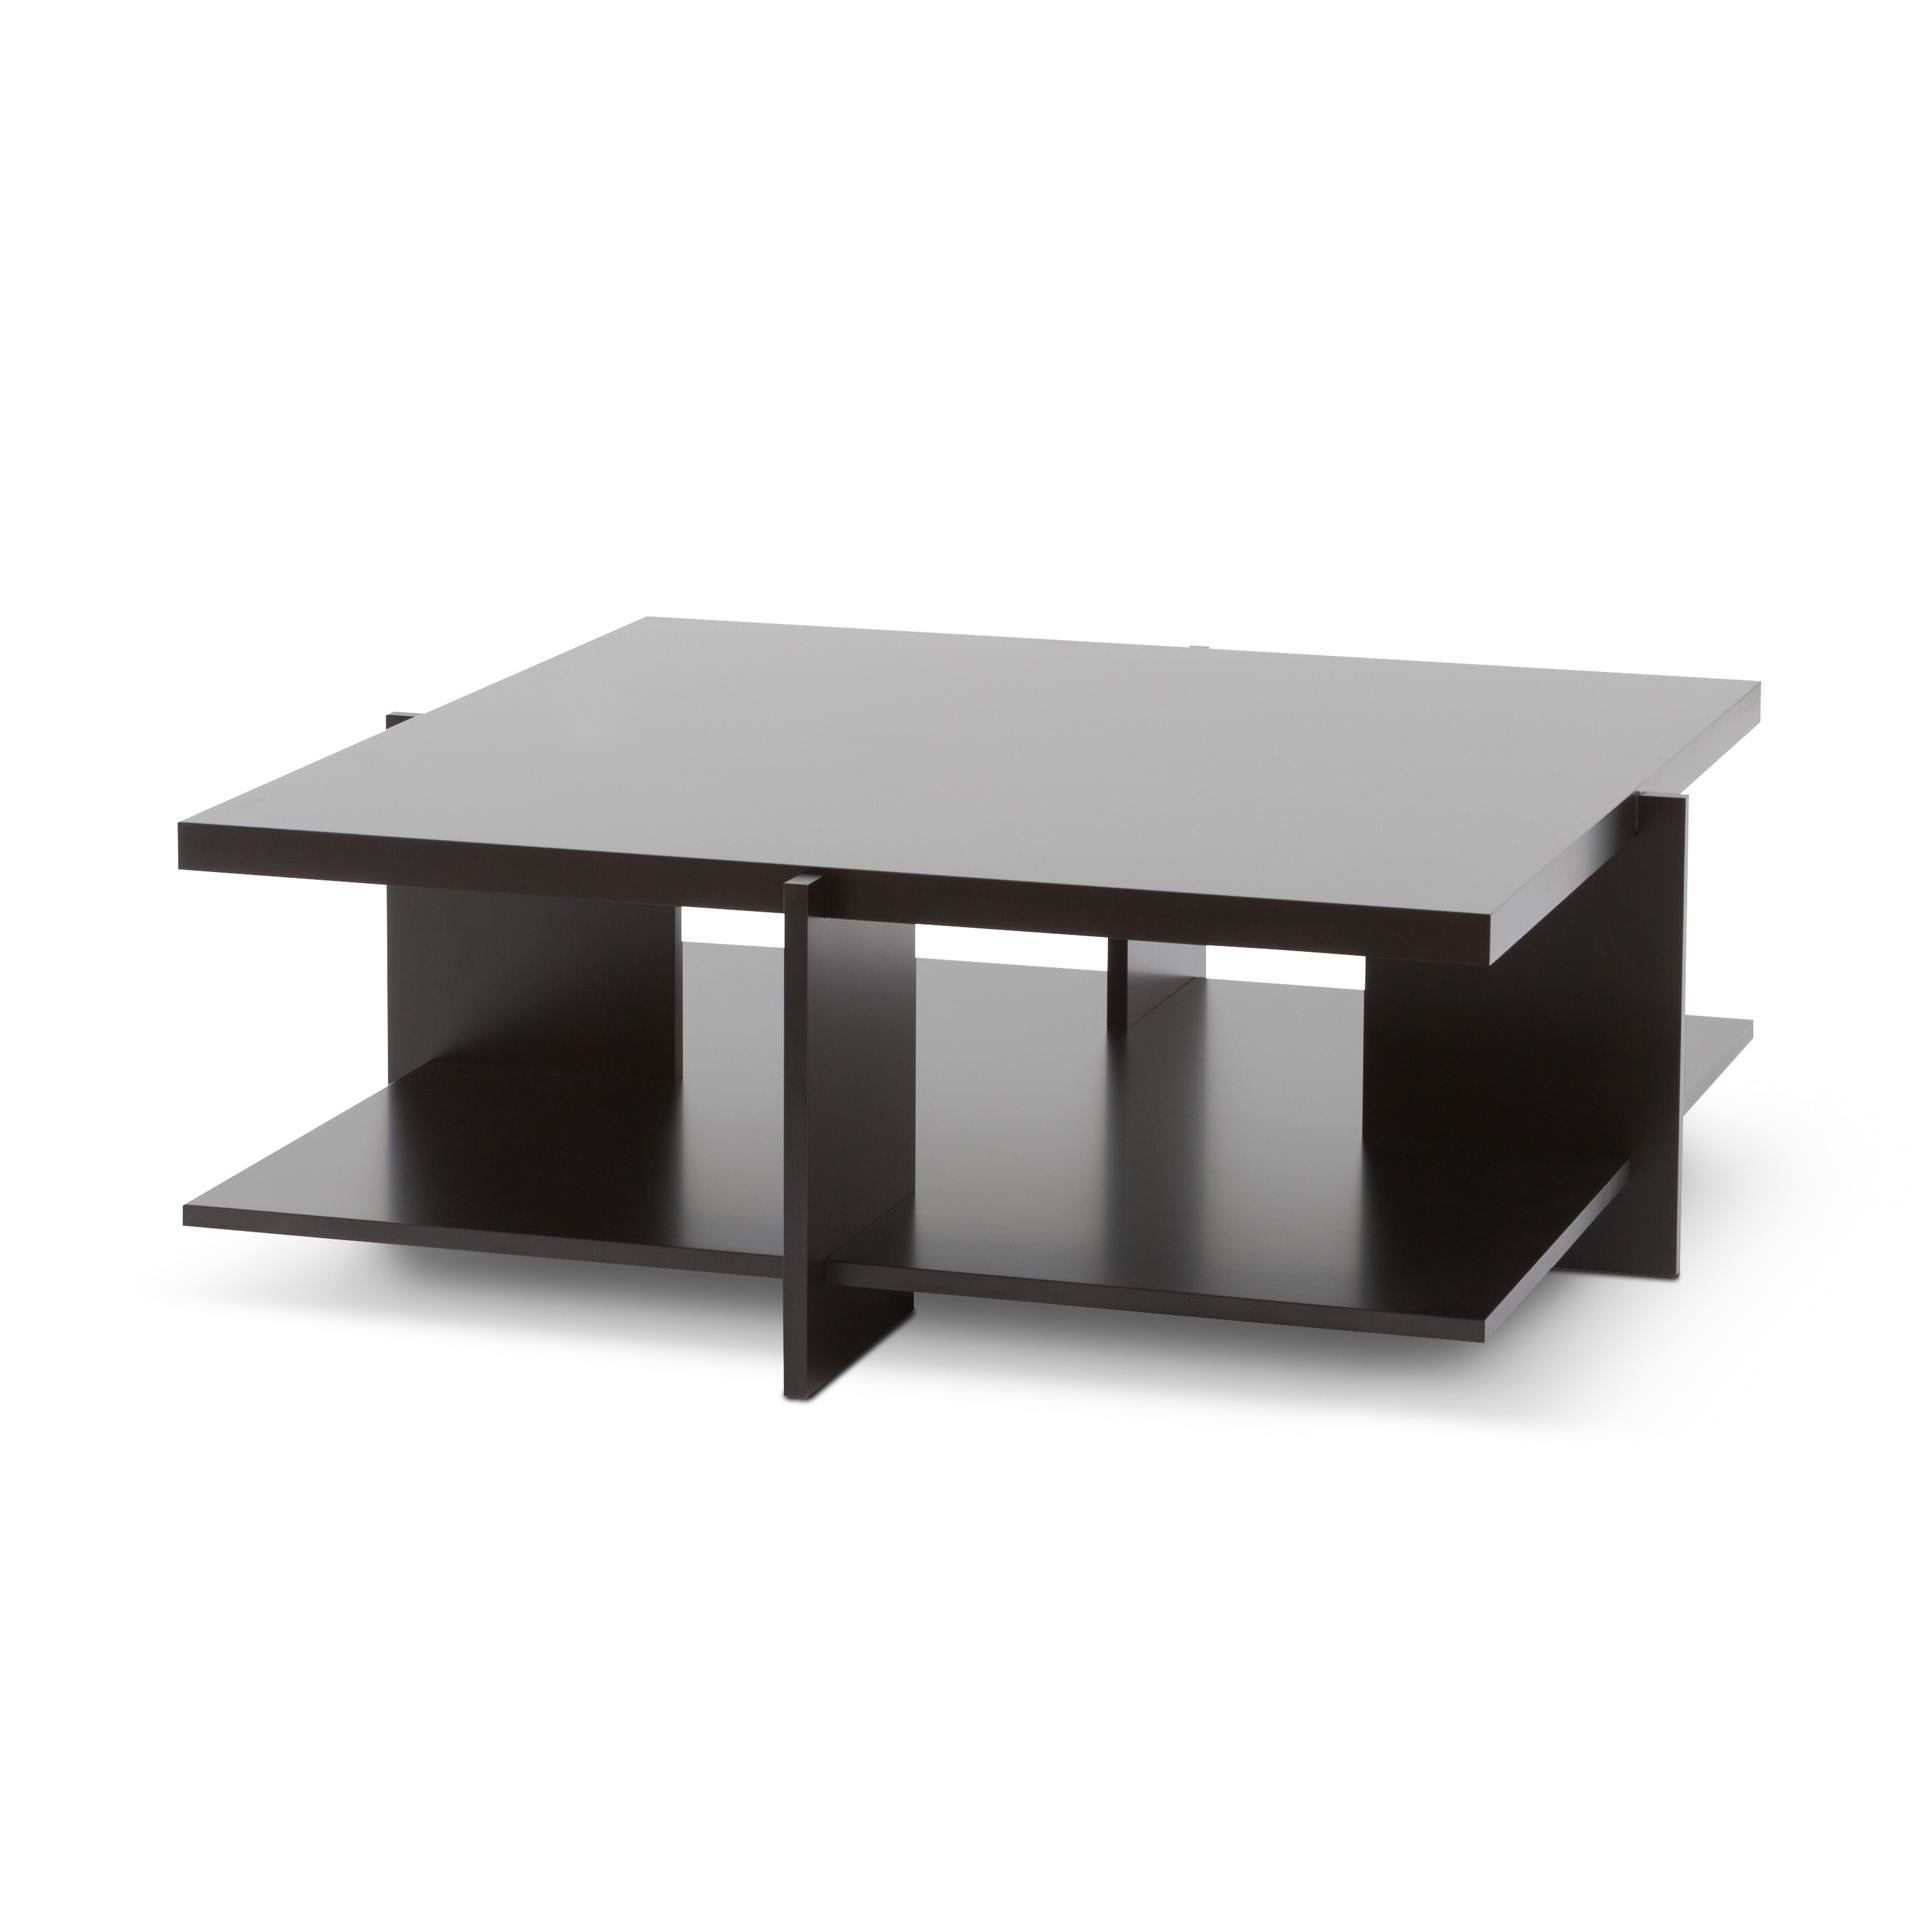 Coffee table designed by Frank Lloyd Wrigh circa 1939/56, relaunched in 1996.
Manufactured by Cassina in Italy.

These low square tables consist of six pieces: two horizontals at top
and bottom, into which are slotted four verticals, in the interior